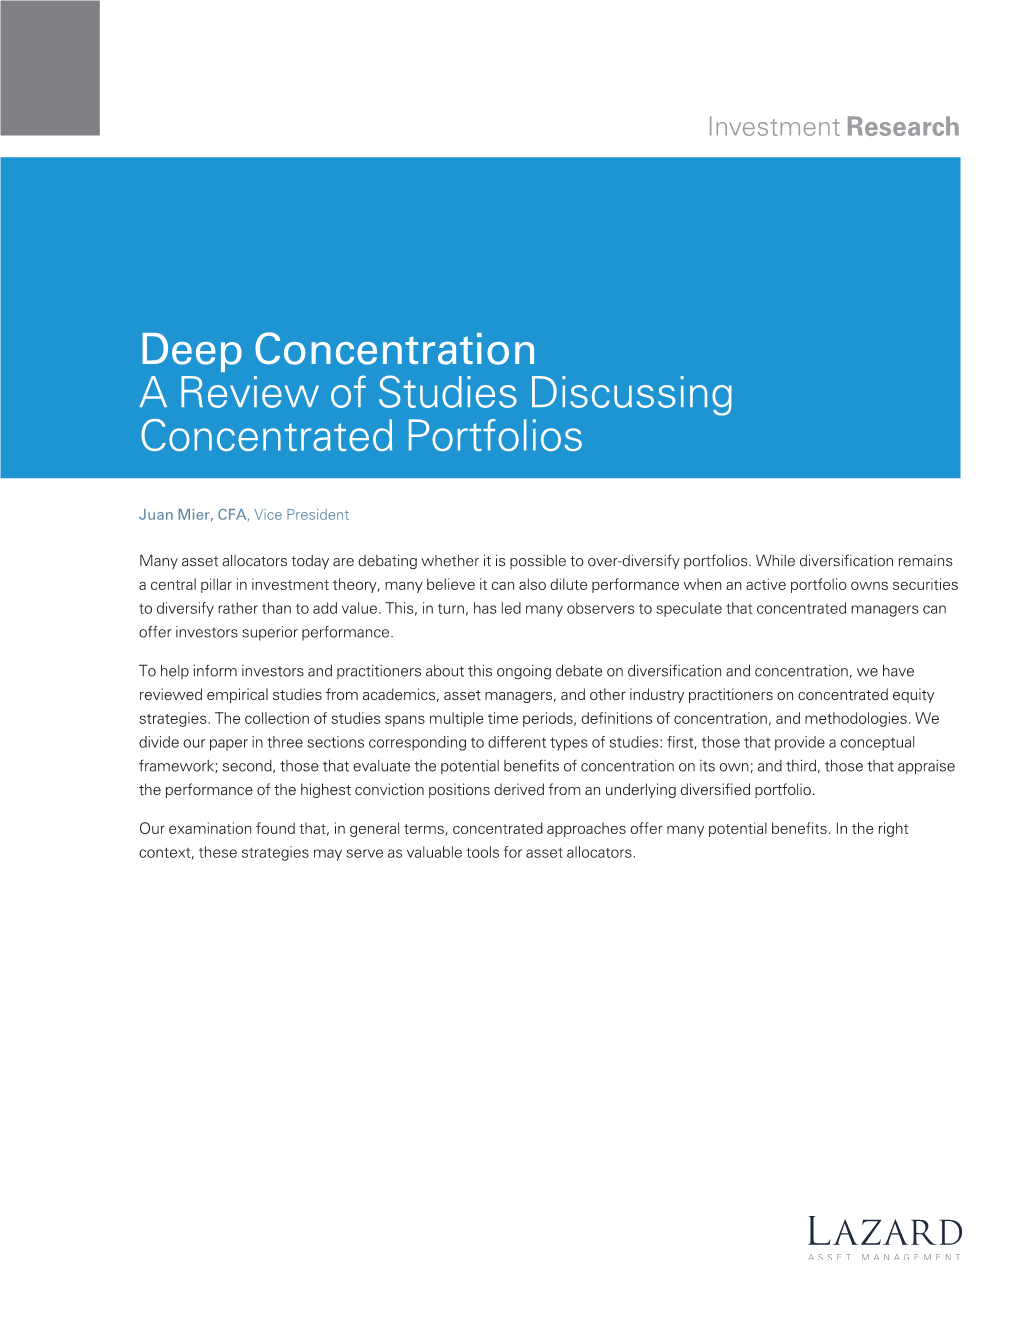 Deep Concentration a Review of Studies Discussing Concentrated Portfolios